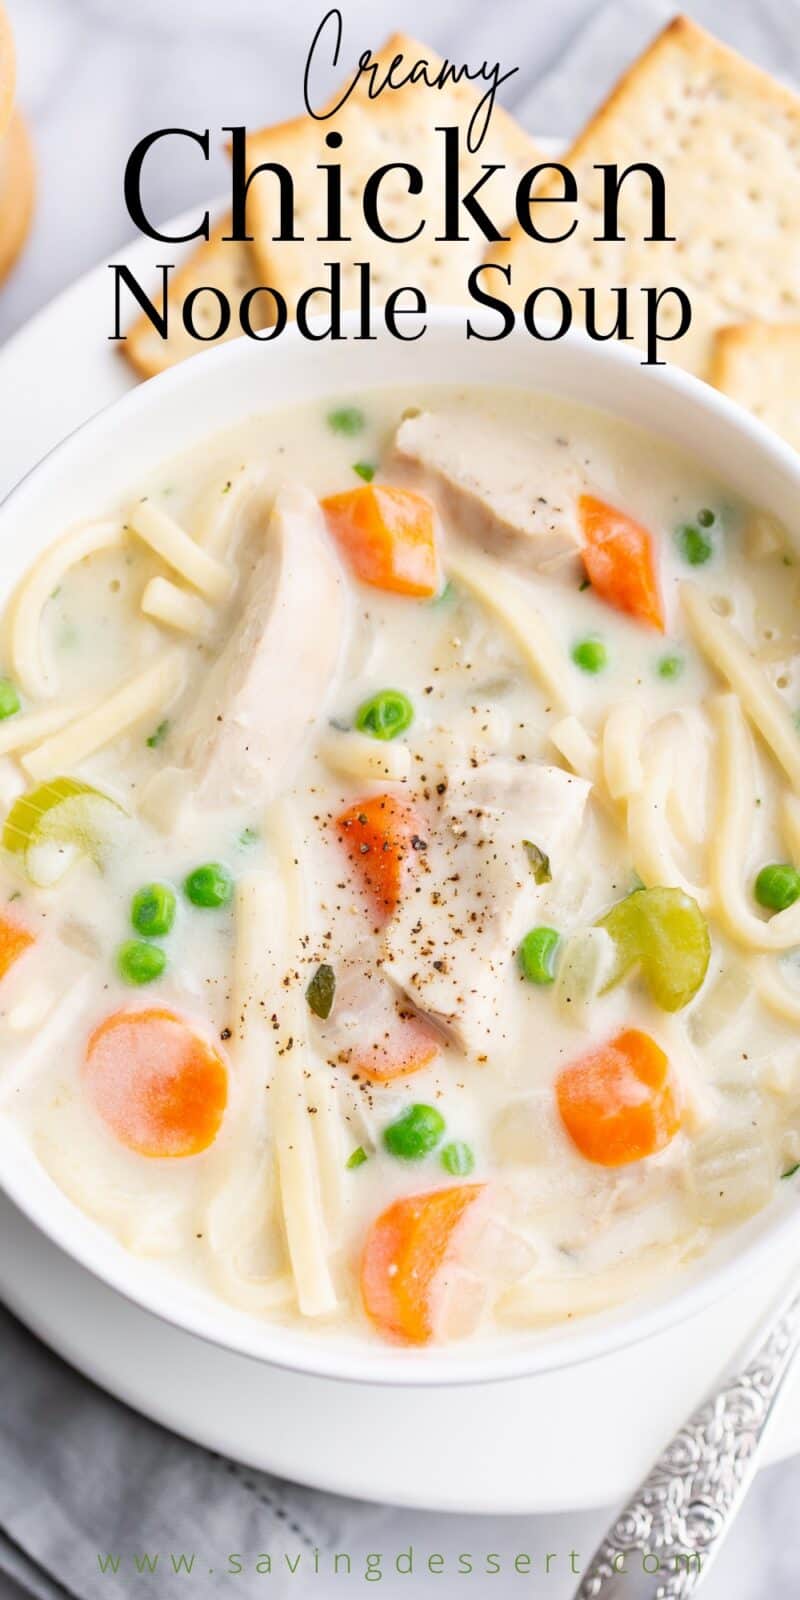 Closeup of a bowl of creamy chicken noodle soup with carrots and celery